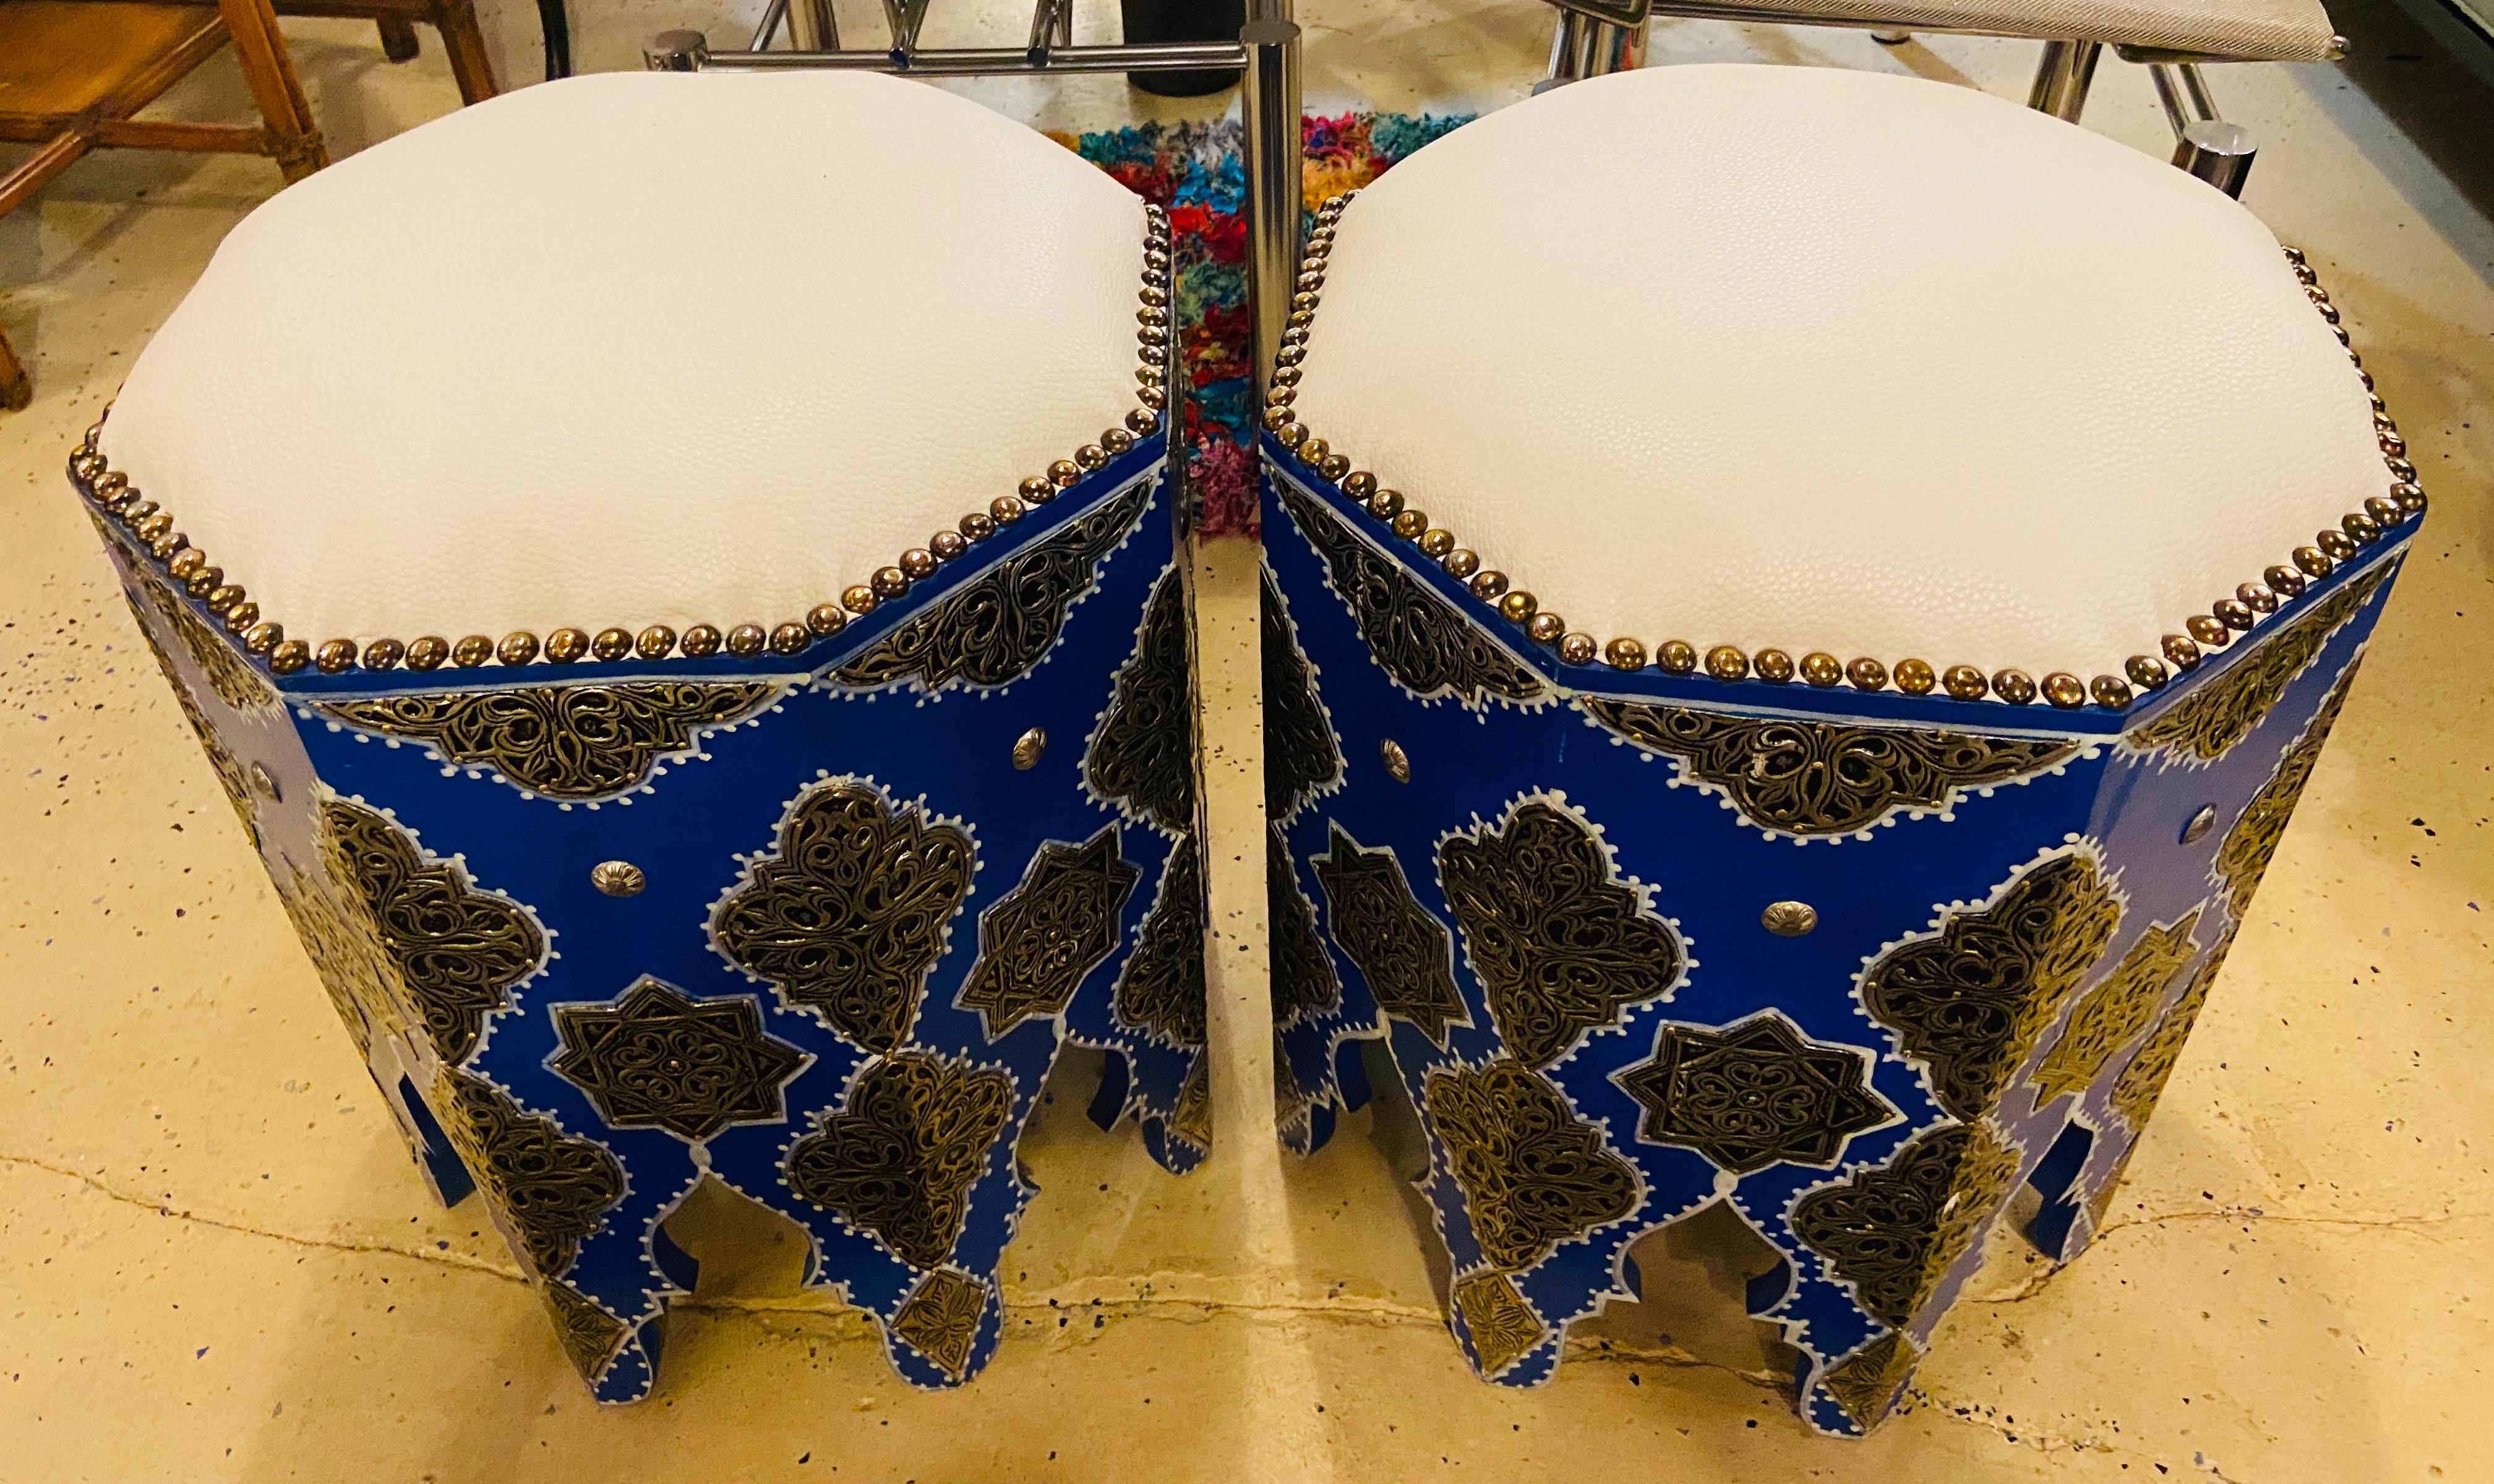 Late 20th Century Boho Chic Moroccan Blue Majorelle Stool or Ottoman with White Leather Top, Pair For Sale